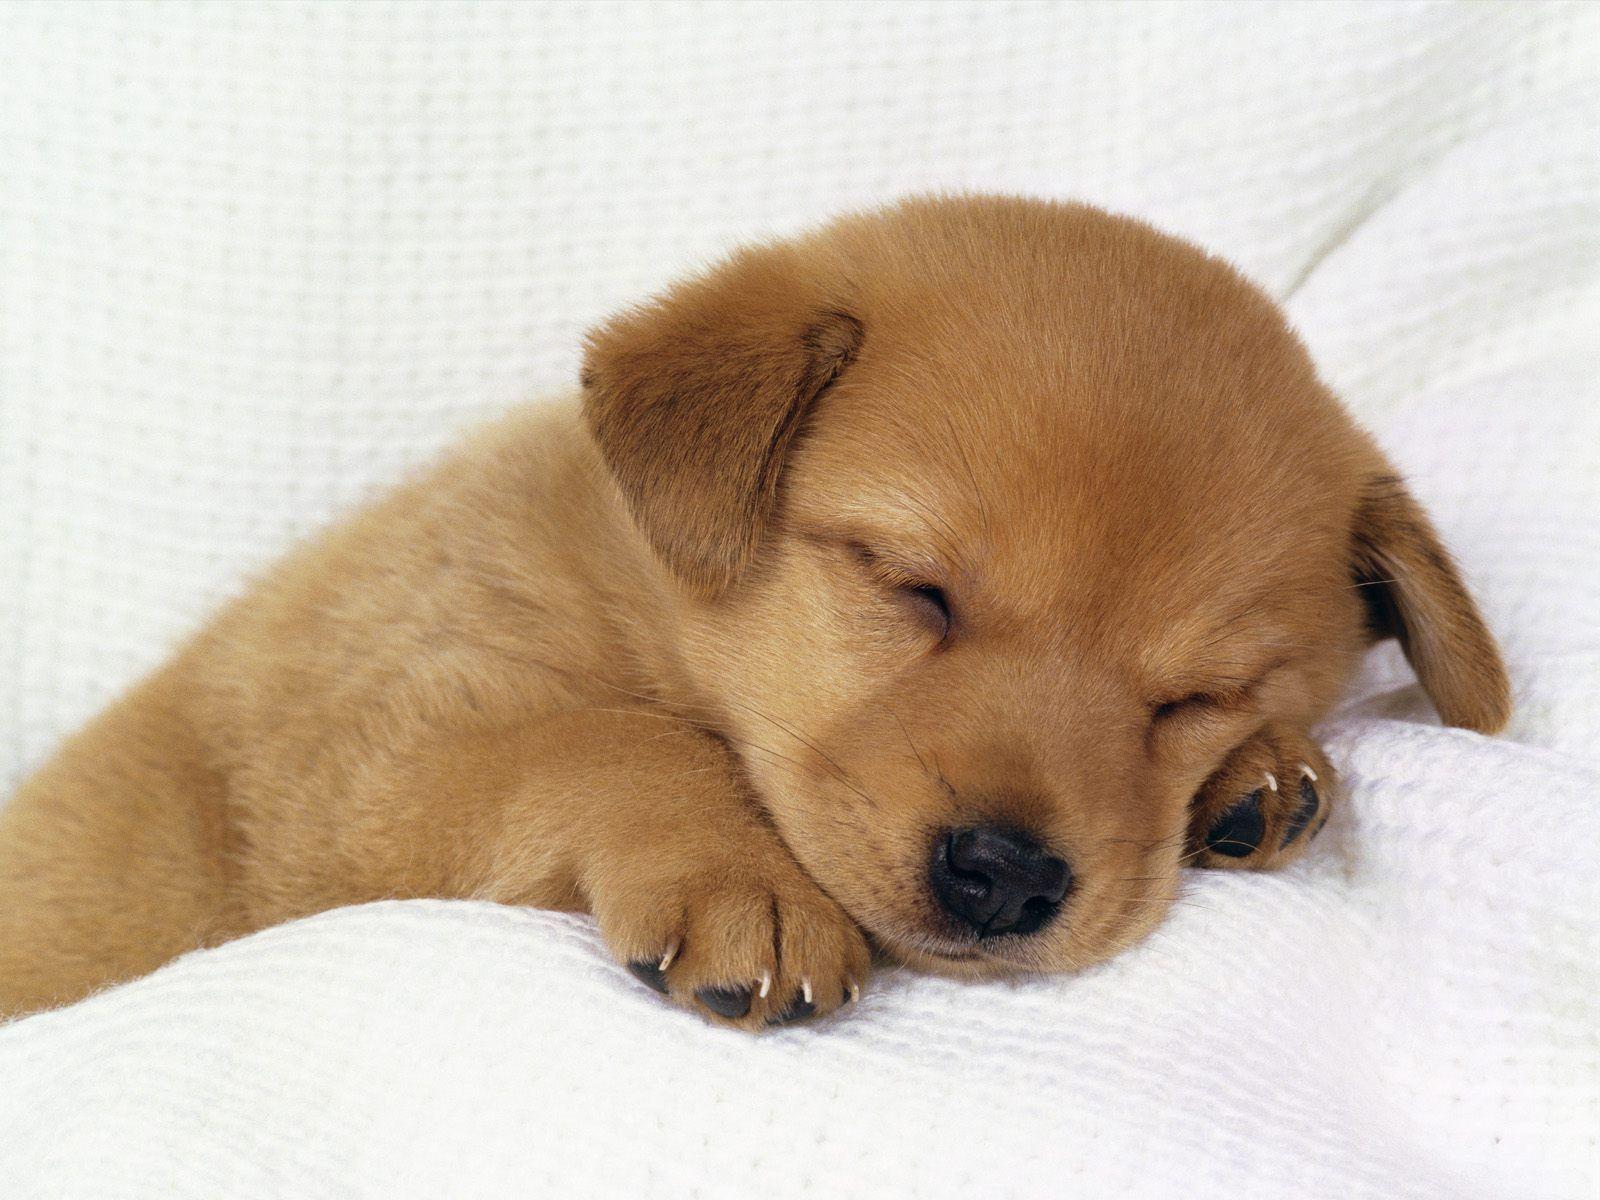 Cute Baby Dog Wallpaper Background. Dogs Wallpaper Background